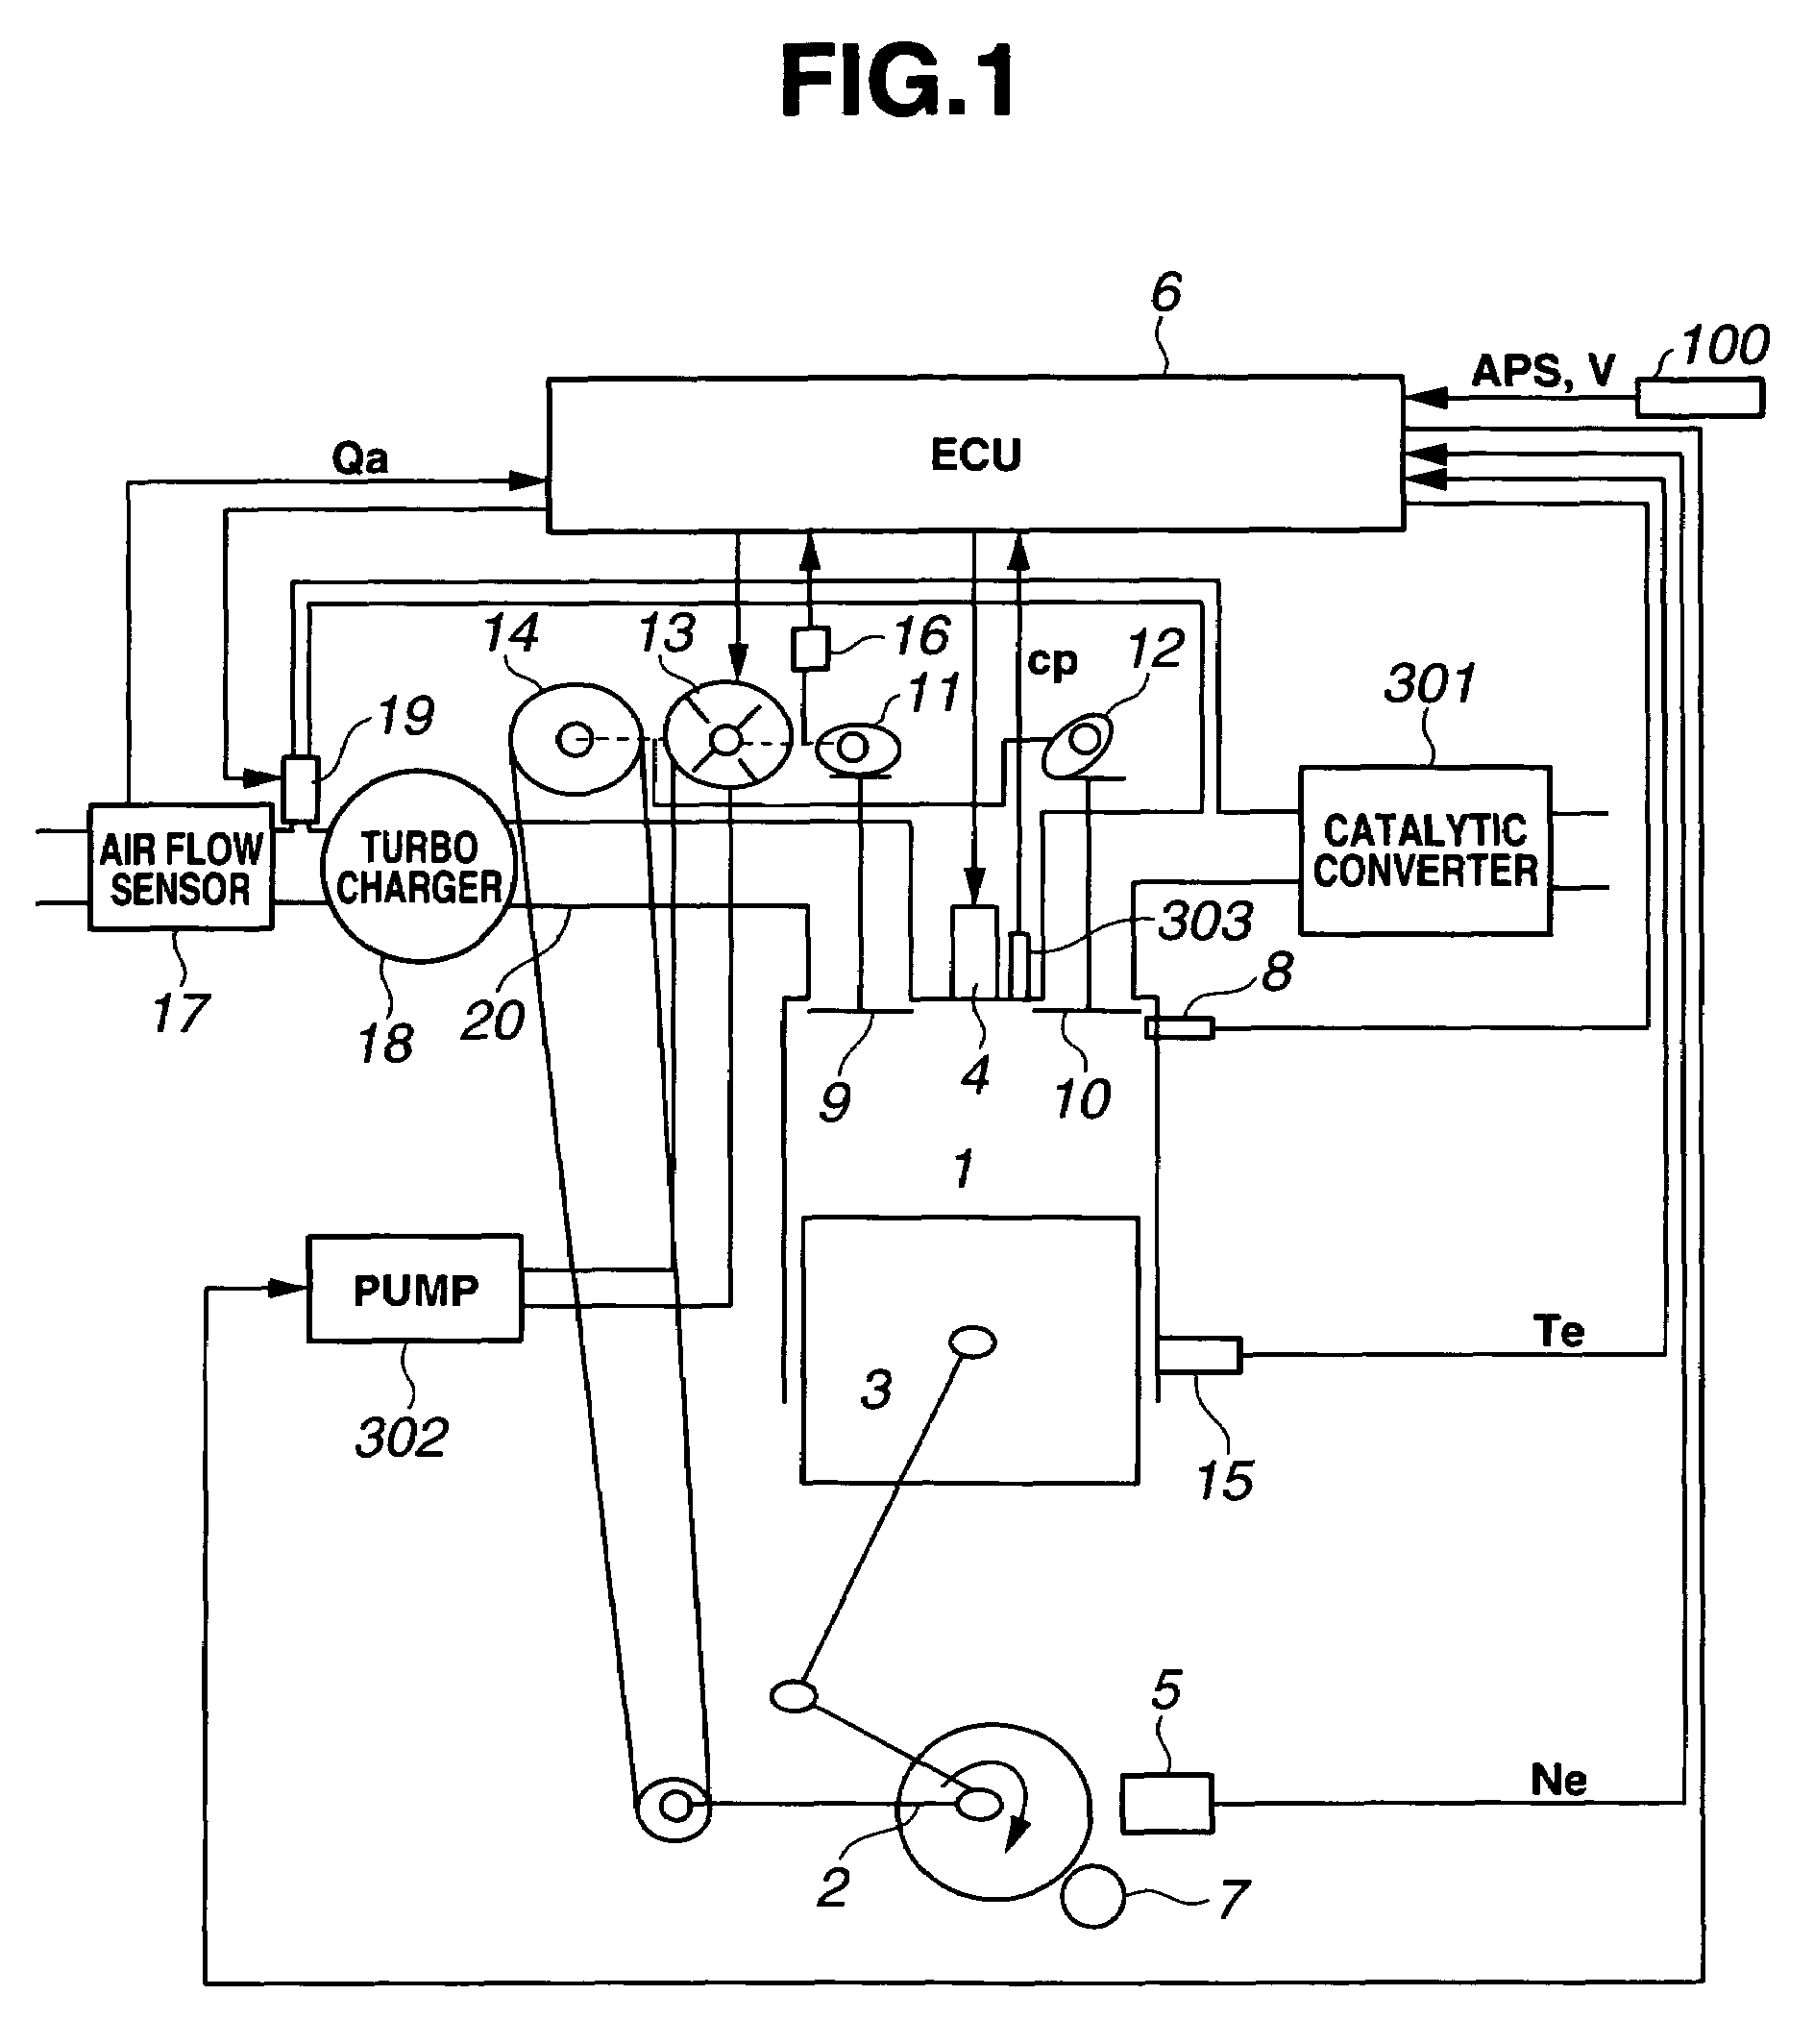 Control apparatus for controlling internal combustion engines